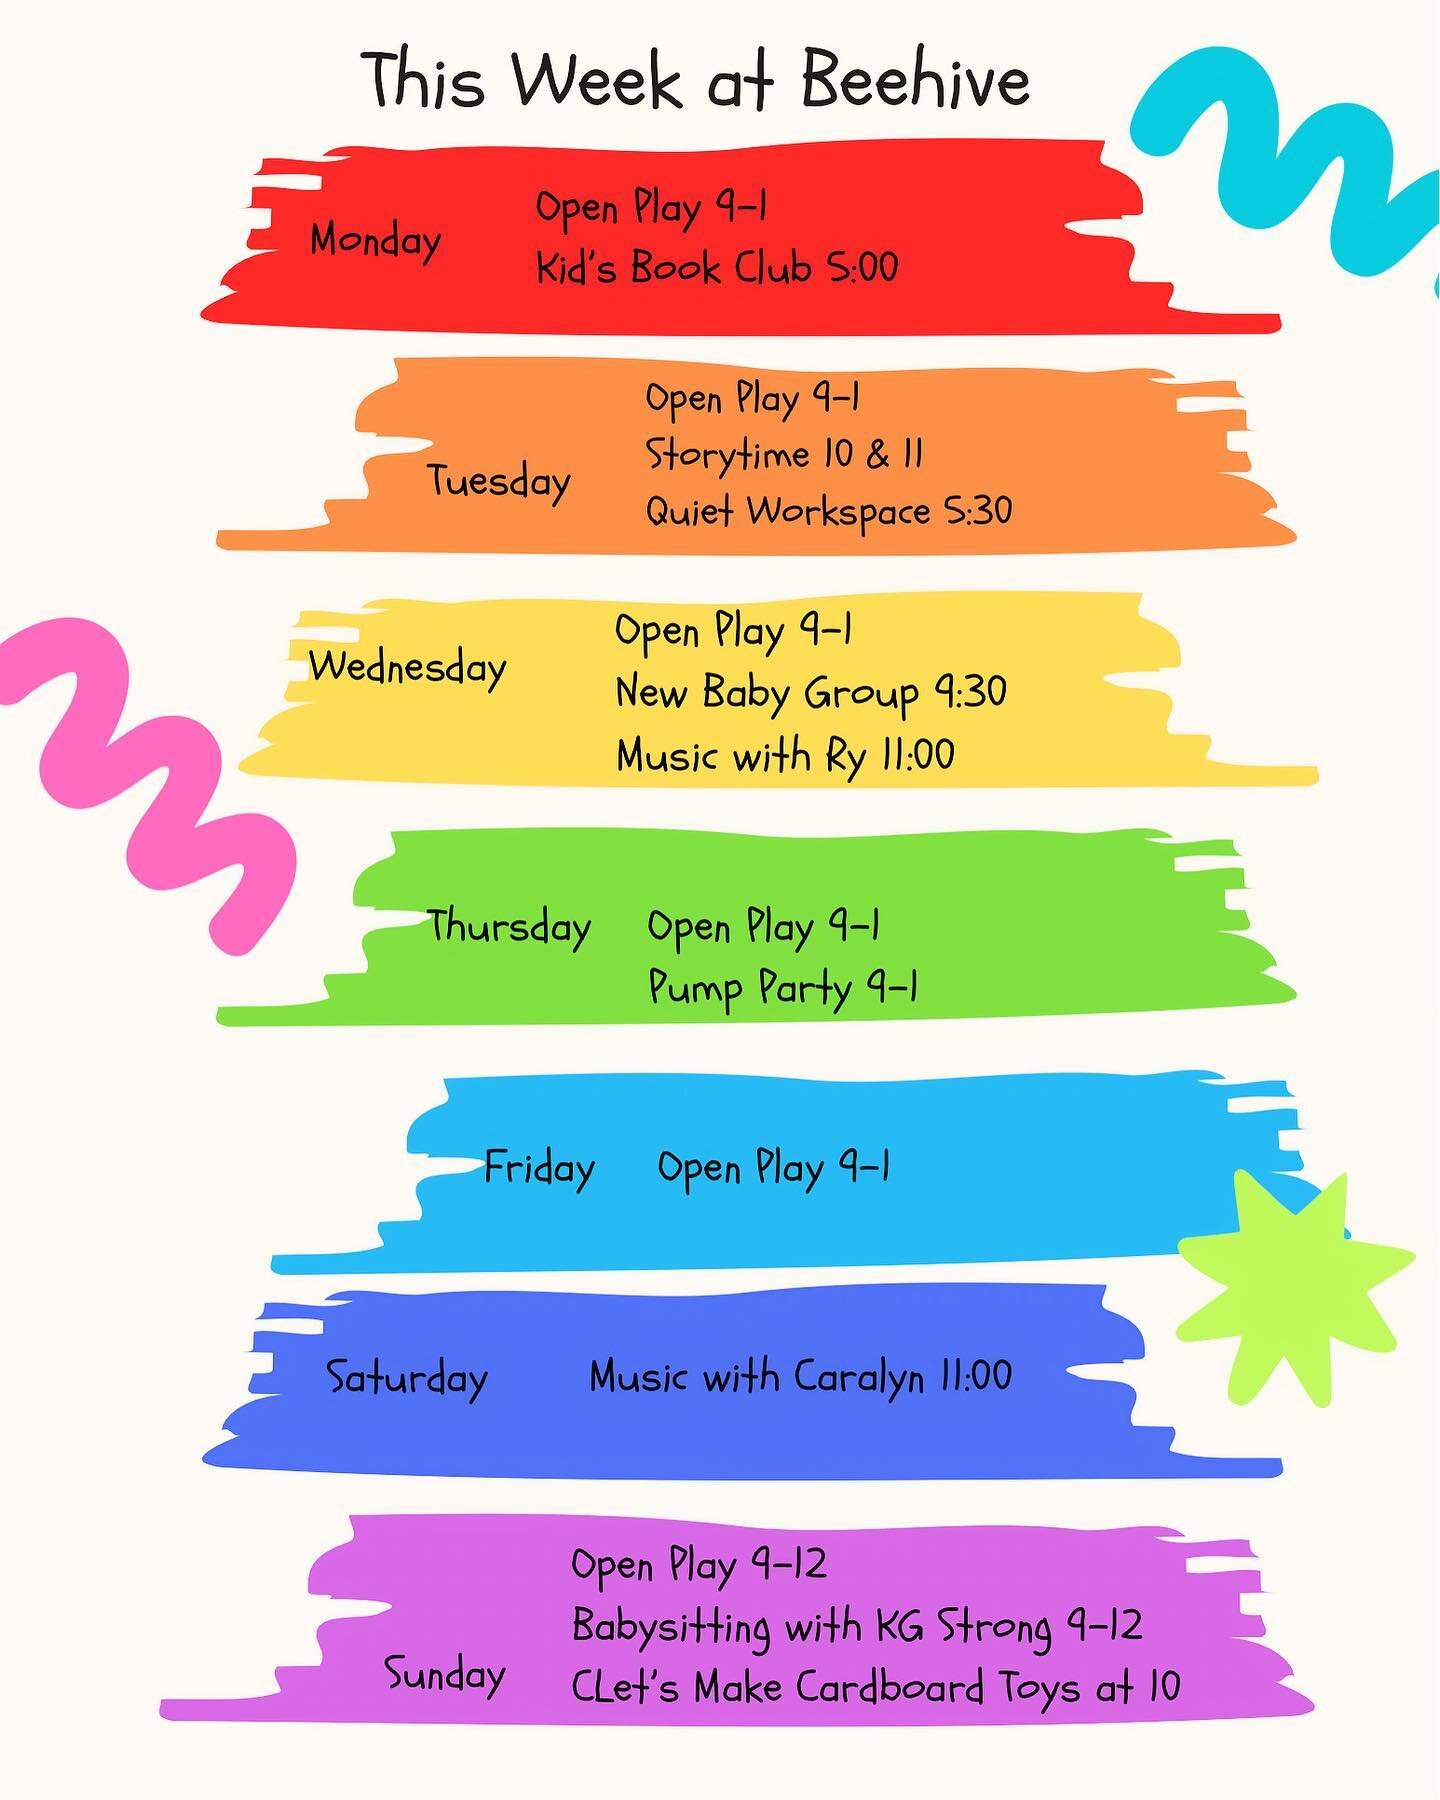 What an upcoming week we have at @beehivecommunity &amp; @beehiveupstairs with @music_with_ry @grab_n_flow @musicwithcaralyn @lisaconnartist @cynaminquale @kg_strong &amp; more!

Join us ❤️🌙

@buildingbok @phillyfamilymag @kidfriendlyphilly @beehive